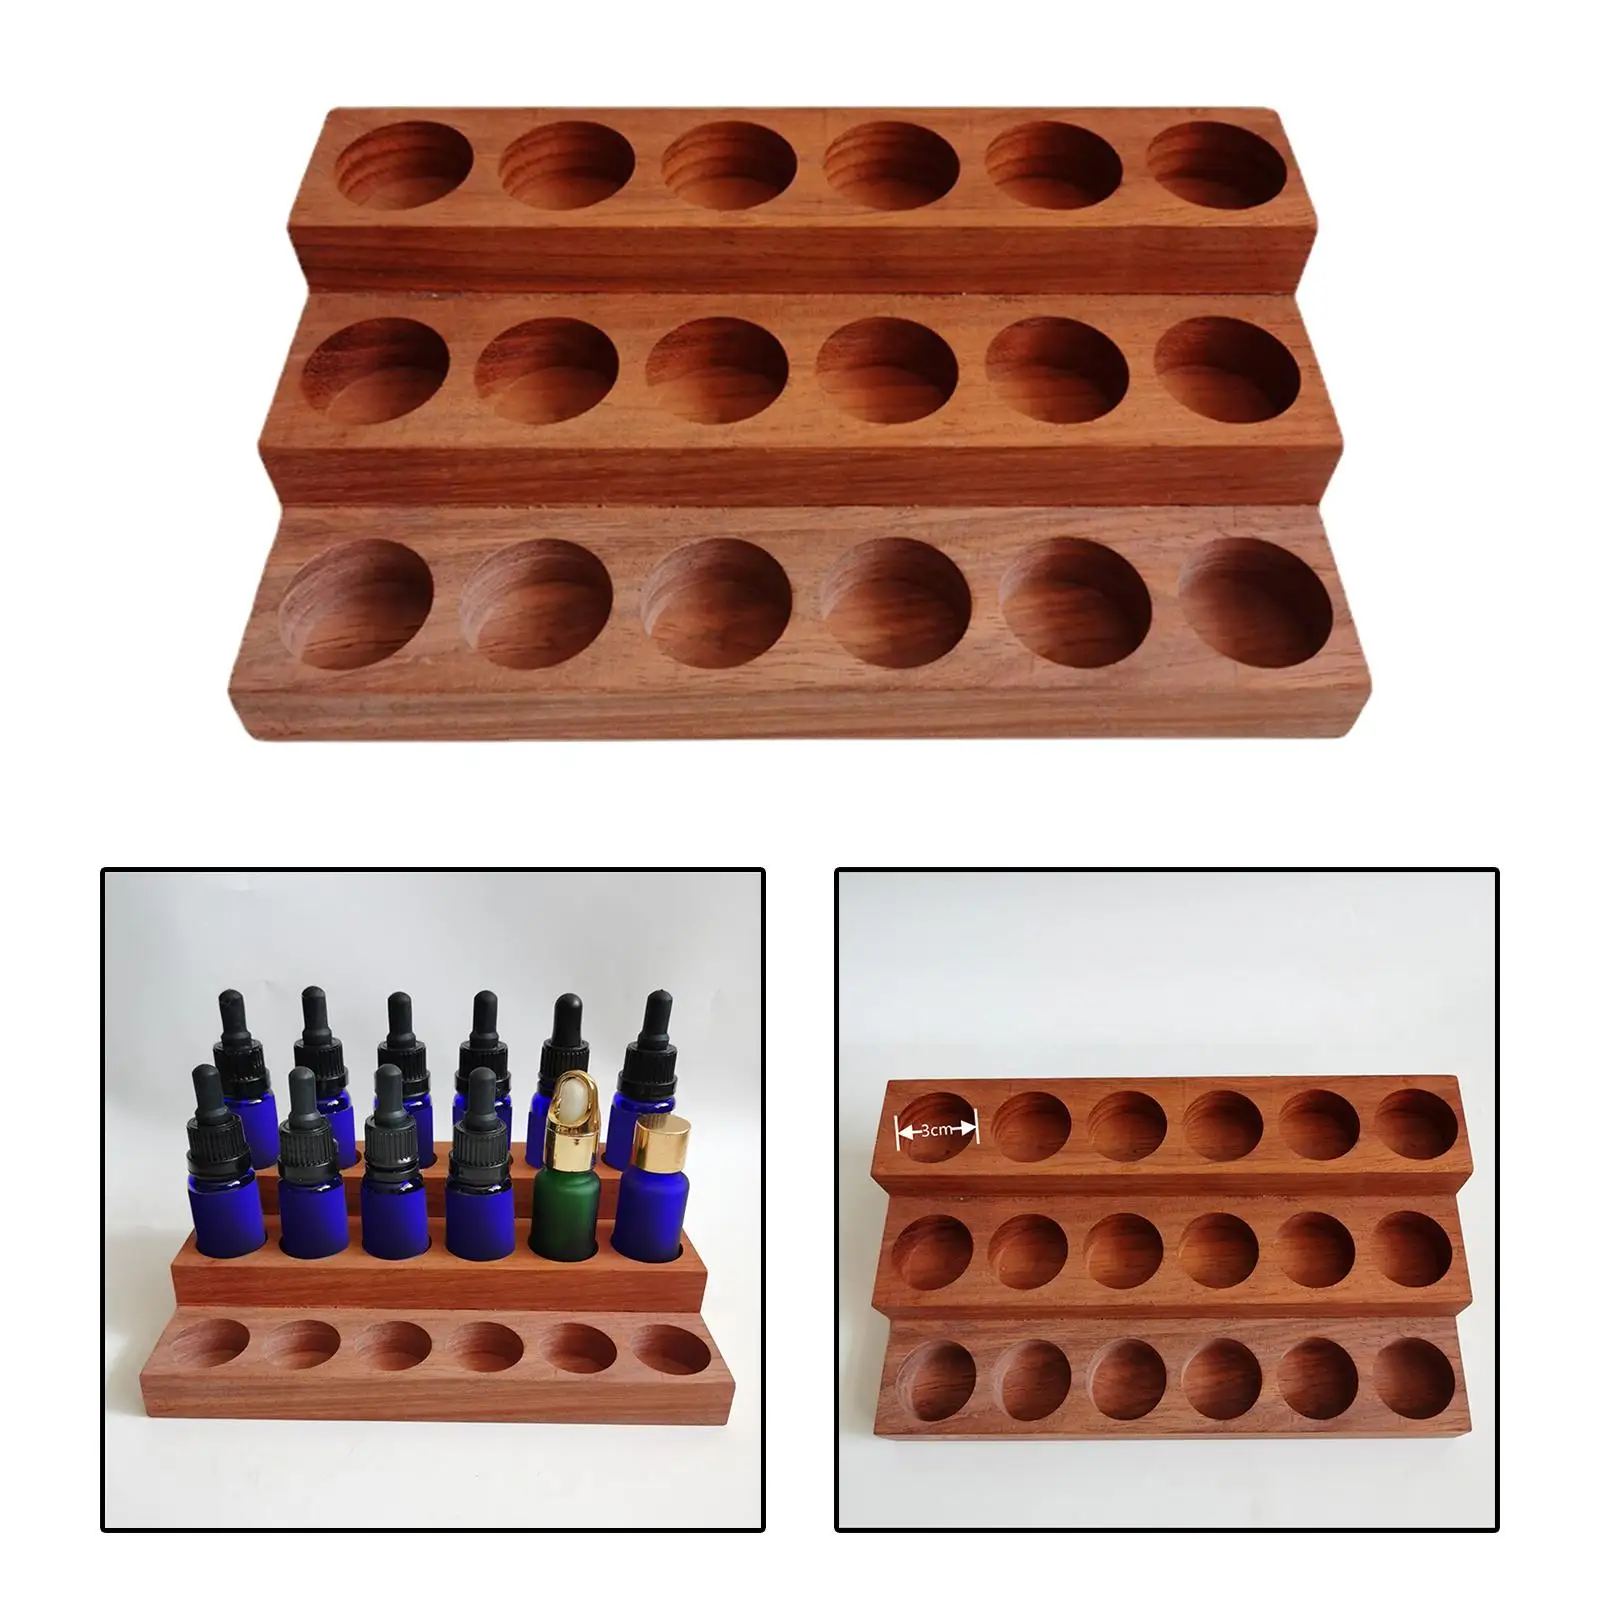 Essential Oils Storage Rack 3 Tiers Wooden for Aromatherapy Bottles Cosmetic